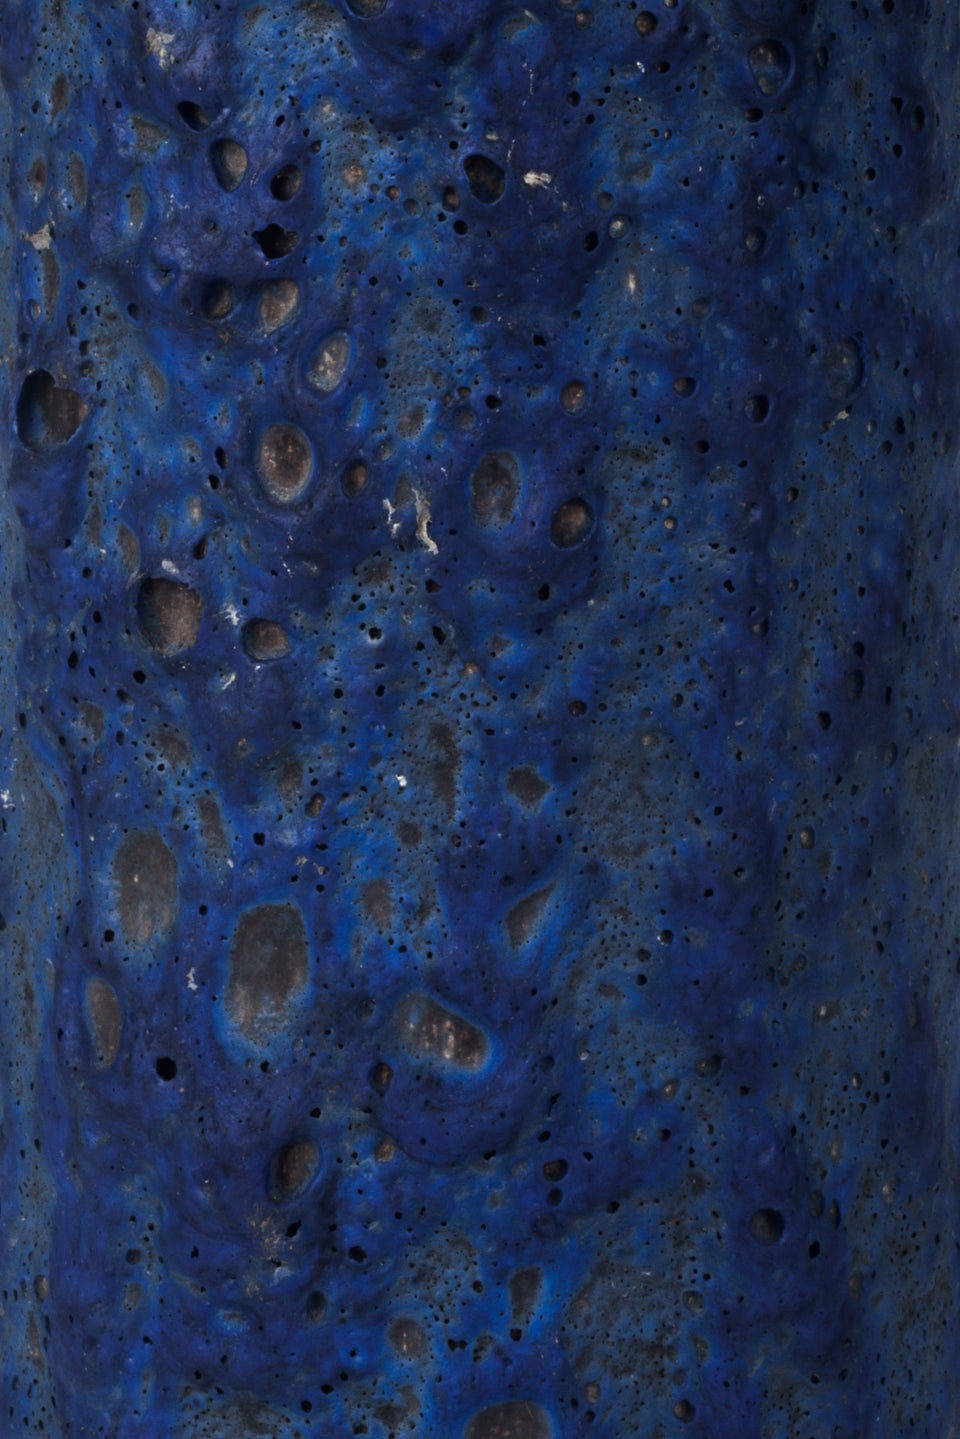 Deep shades of blue, cylindrical West German vase with fat lava glaze, made in the 1970s.